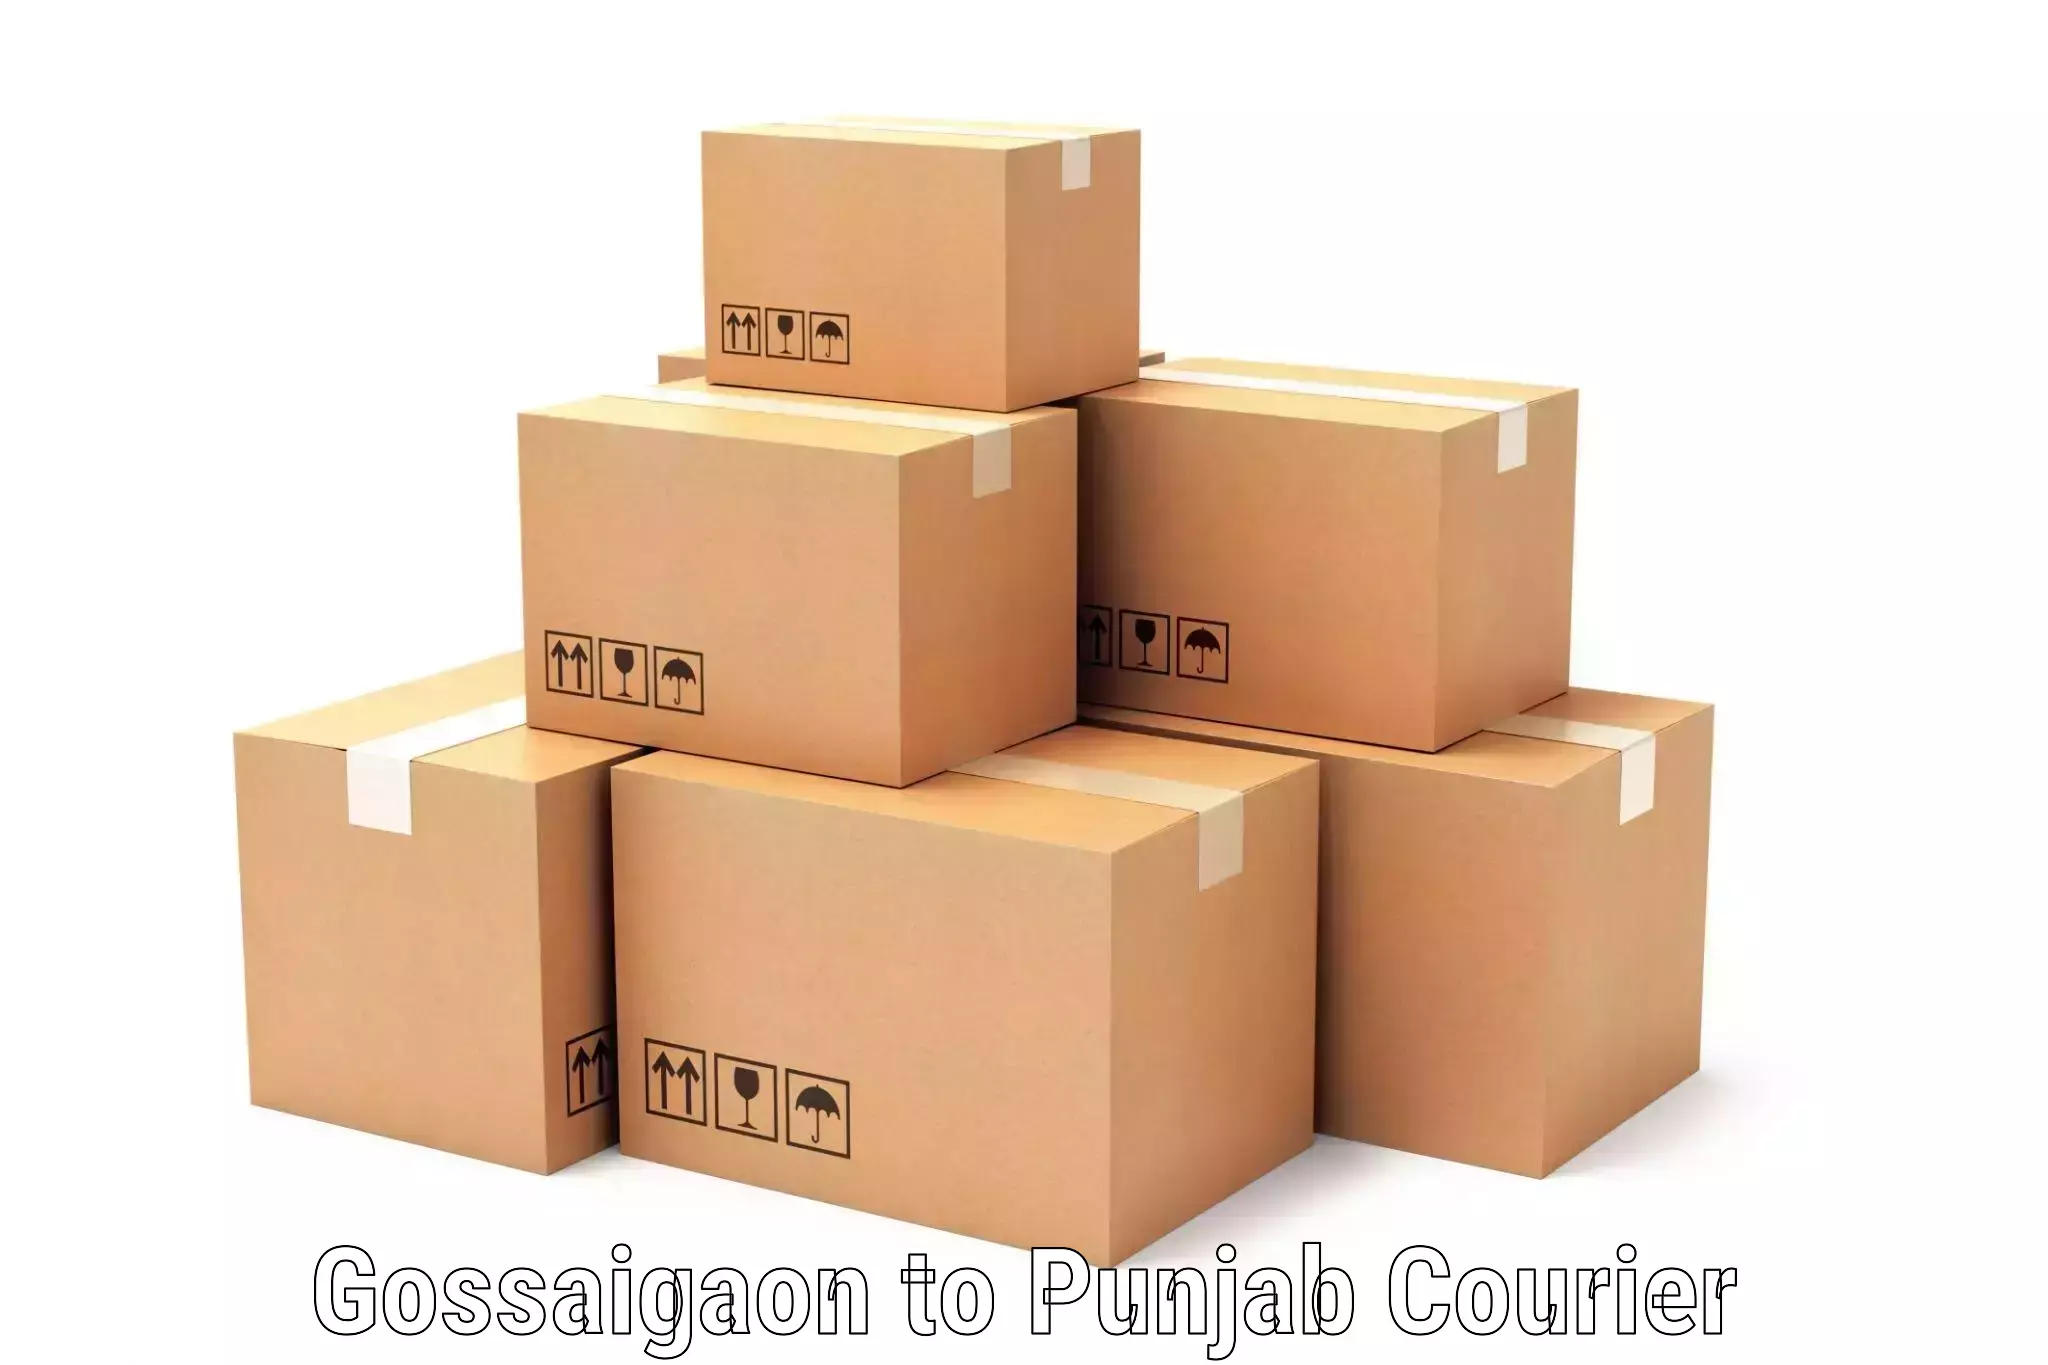 Full-service courier options Gossaigaon to Pathankot